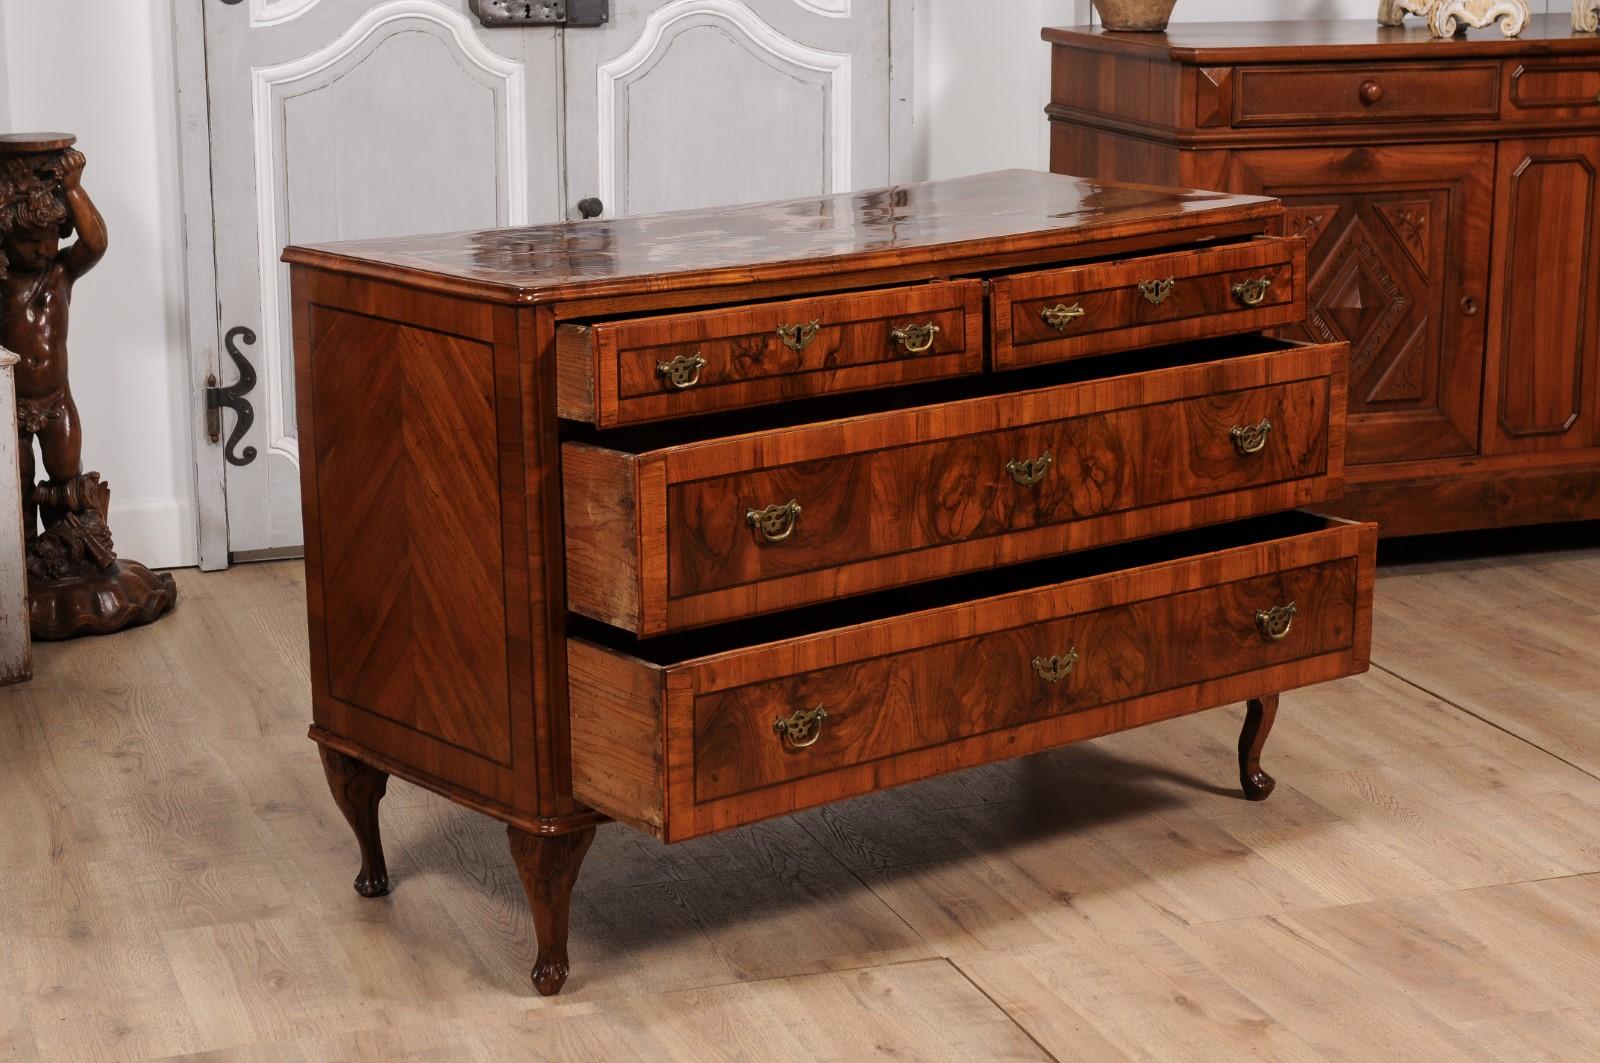 18th Century Venetian Walnut ad Mahogany Commode with Bookmatched Veneer In Good Condition For Sale In Atlanta, GA